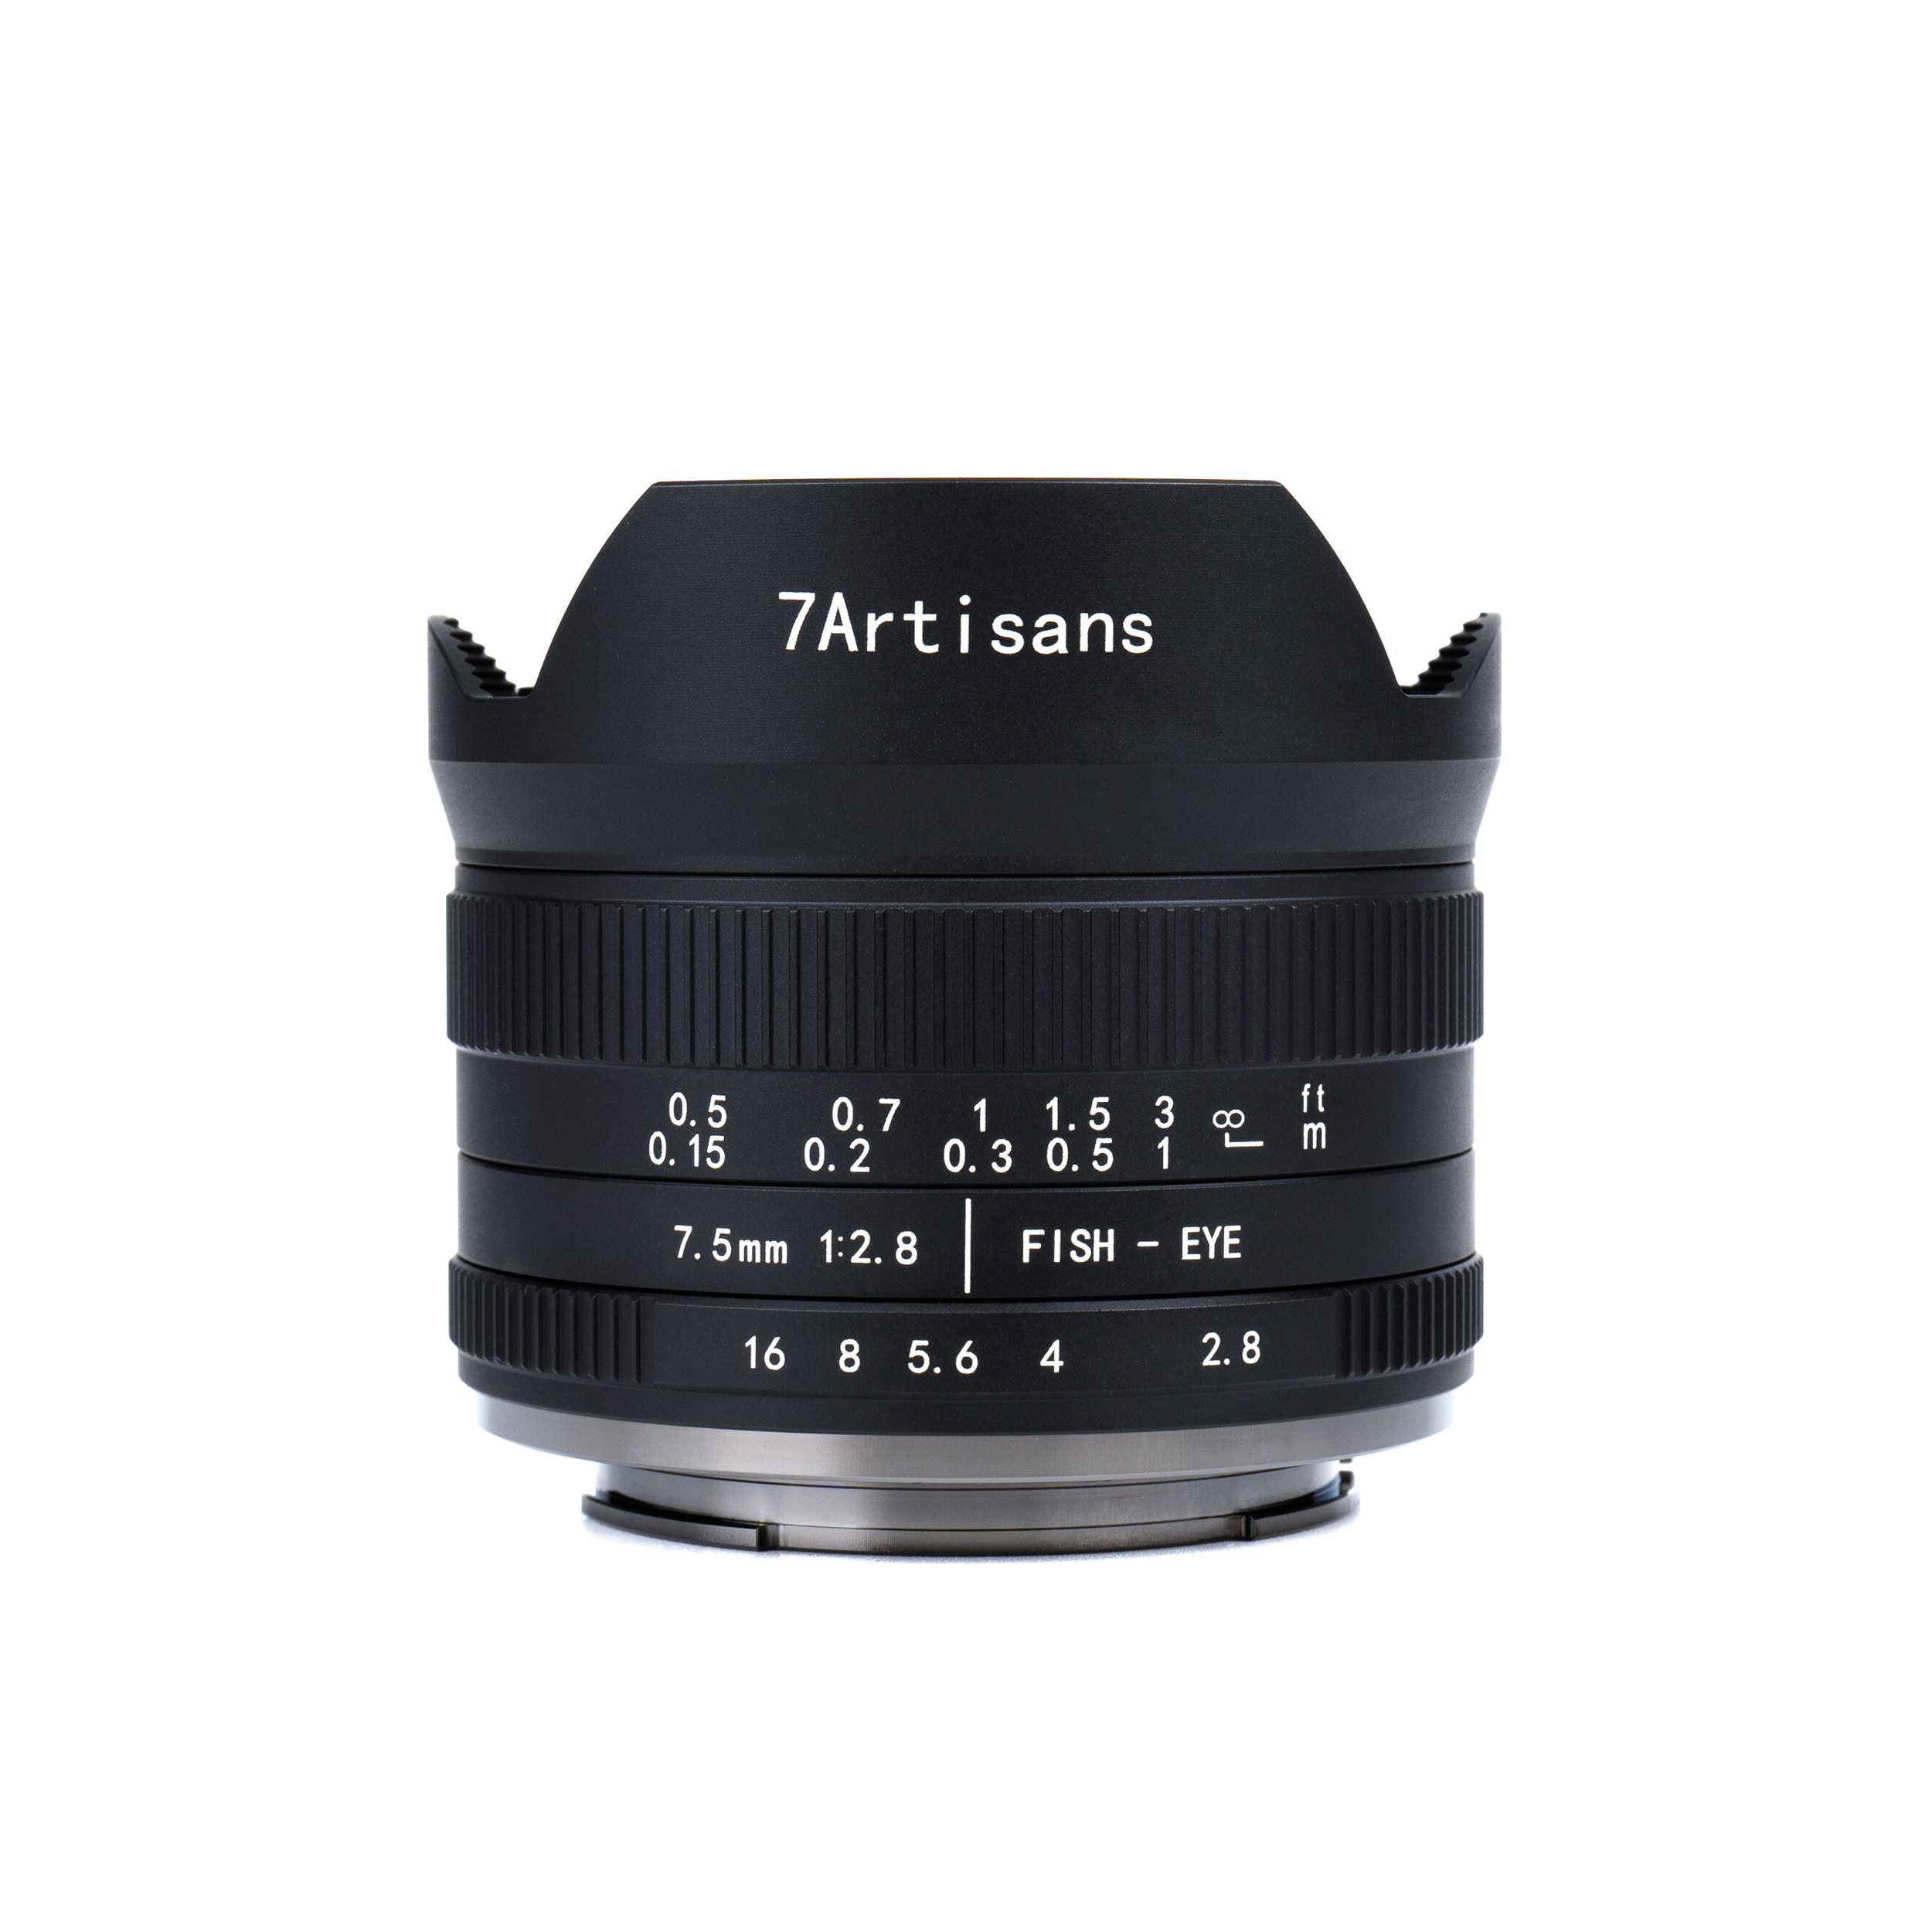 7artisans Photoelectric 7.5mm f/2.8 II Fisheye Lens for Micro Four Thirds Mount